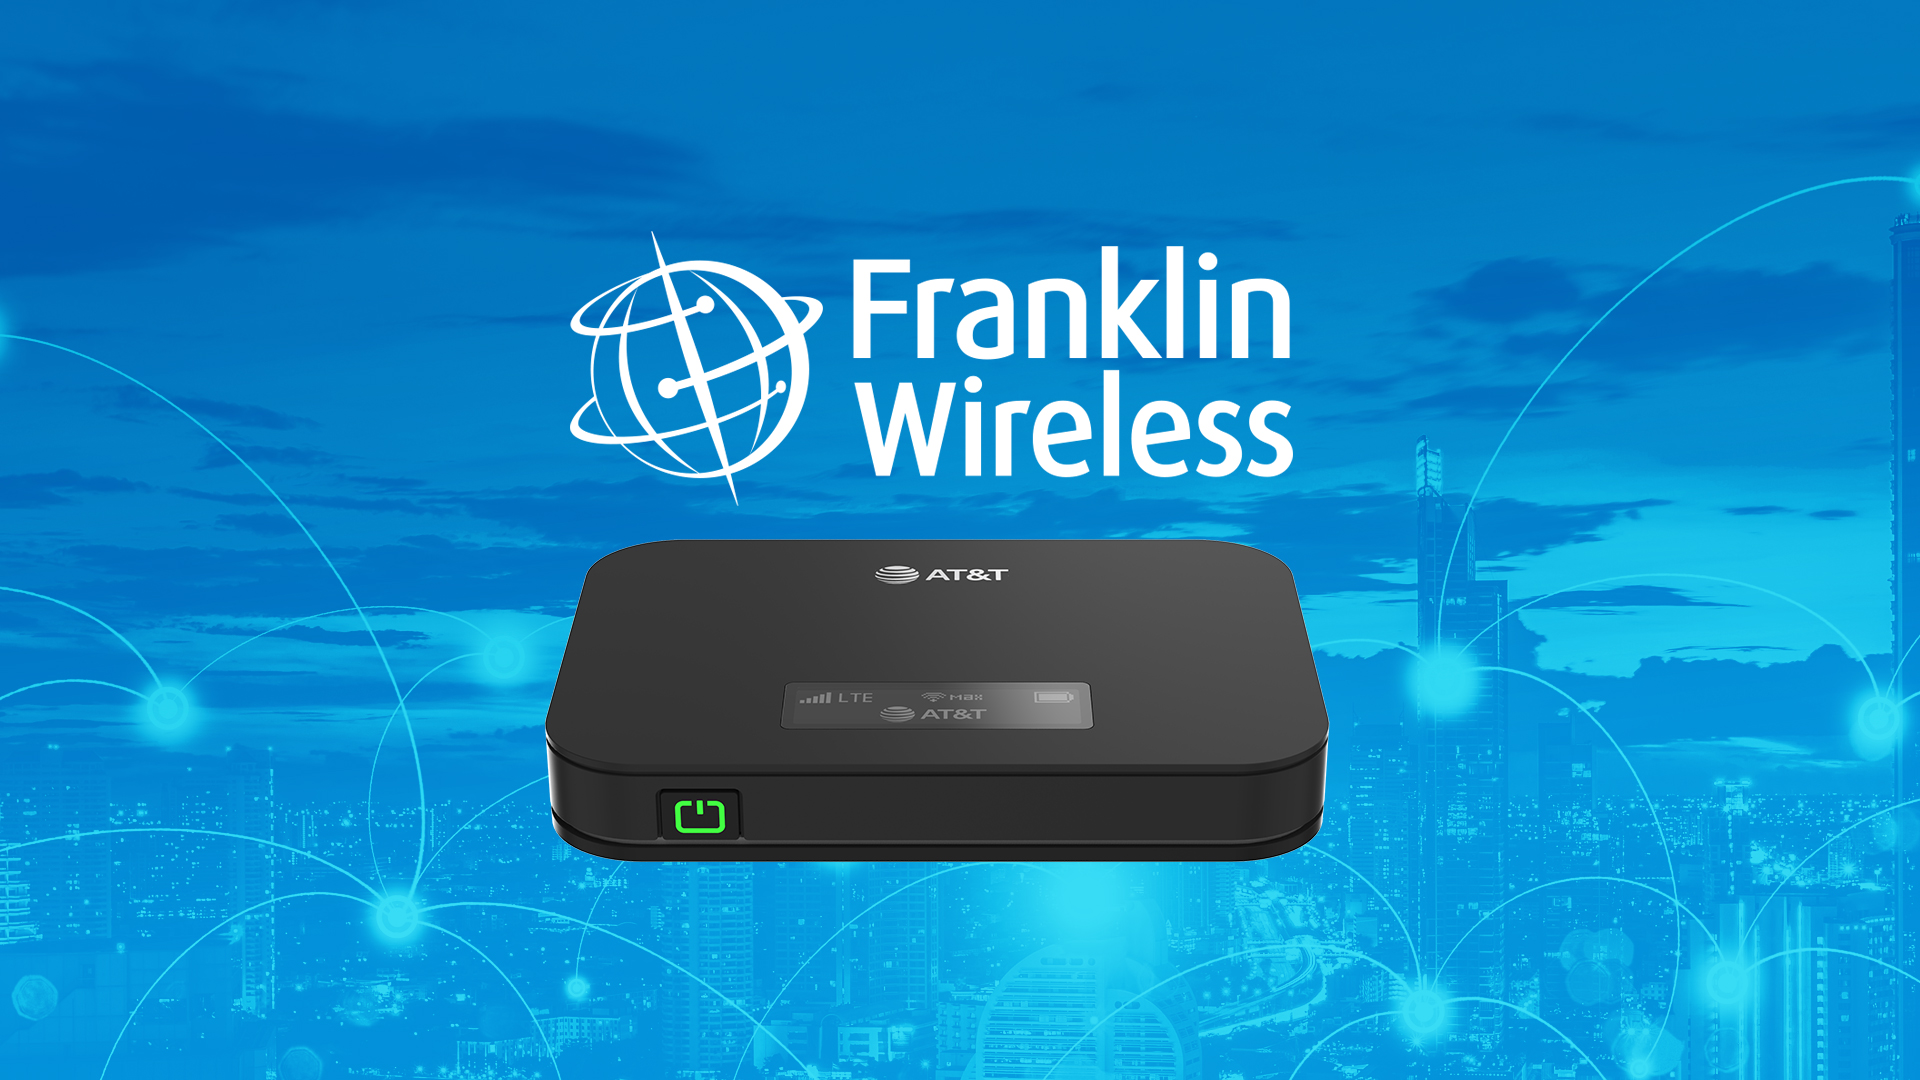 Franklin Wireless Launches Its First AT&T Mobile |